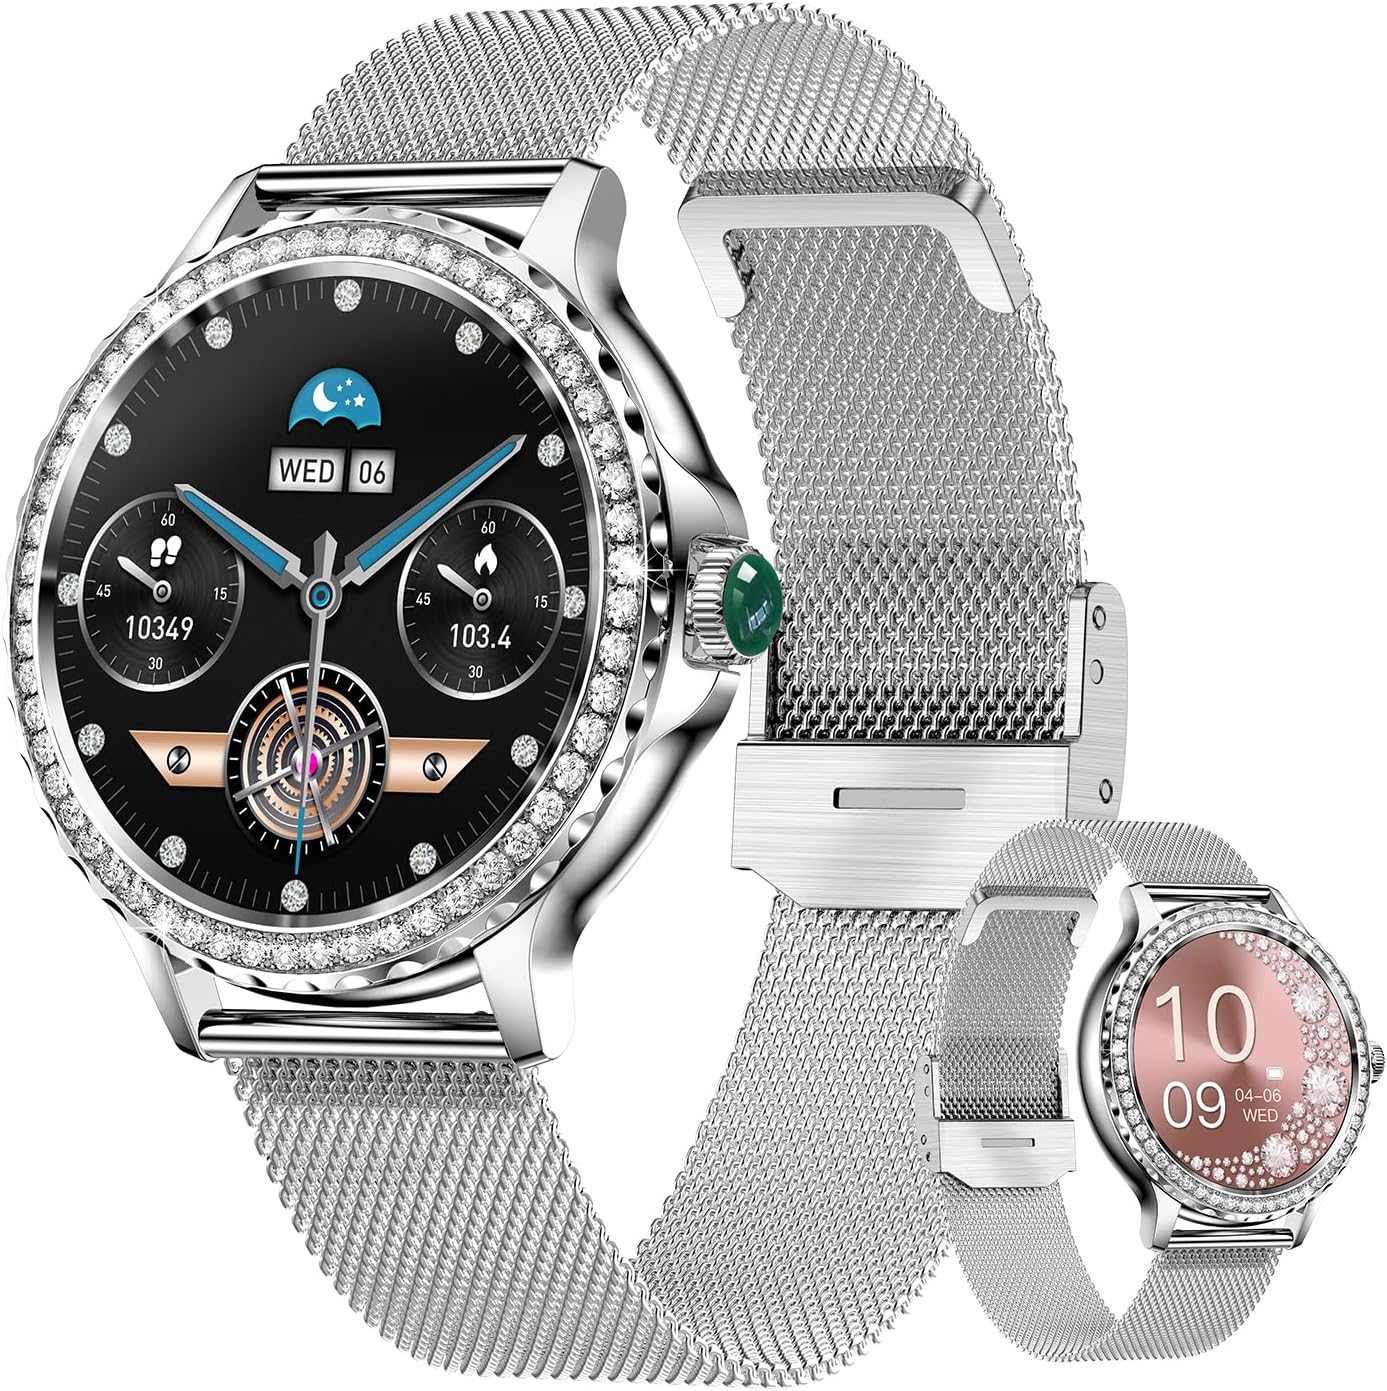 Torich Smart Watch for Women Review: Style and Functionality Combined